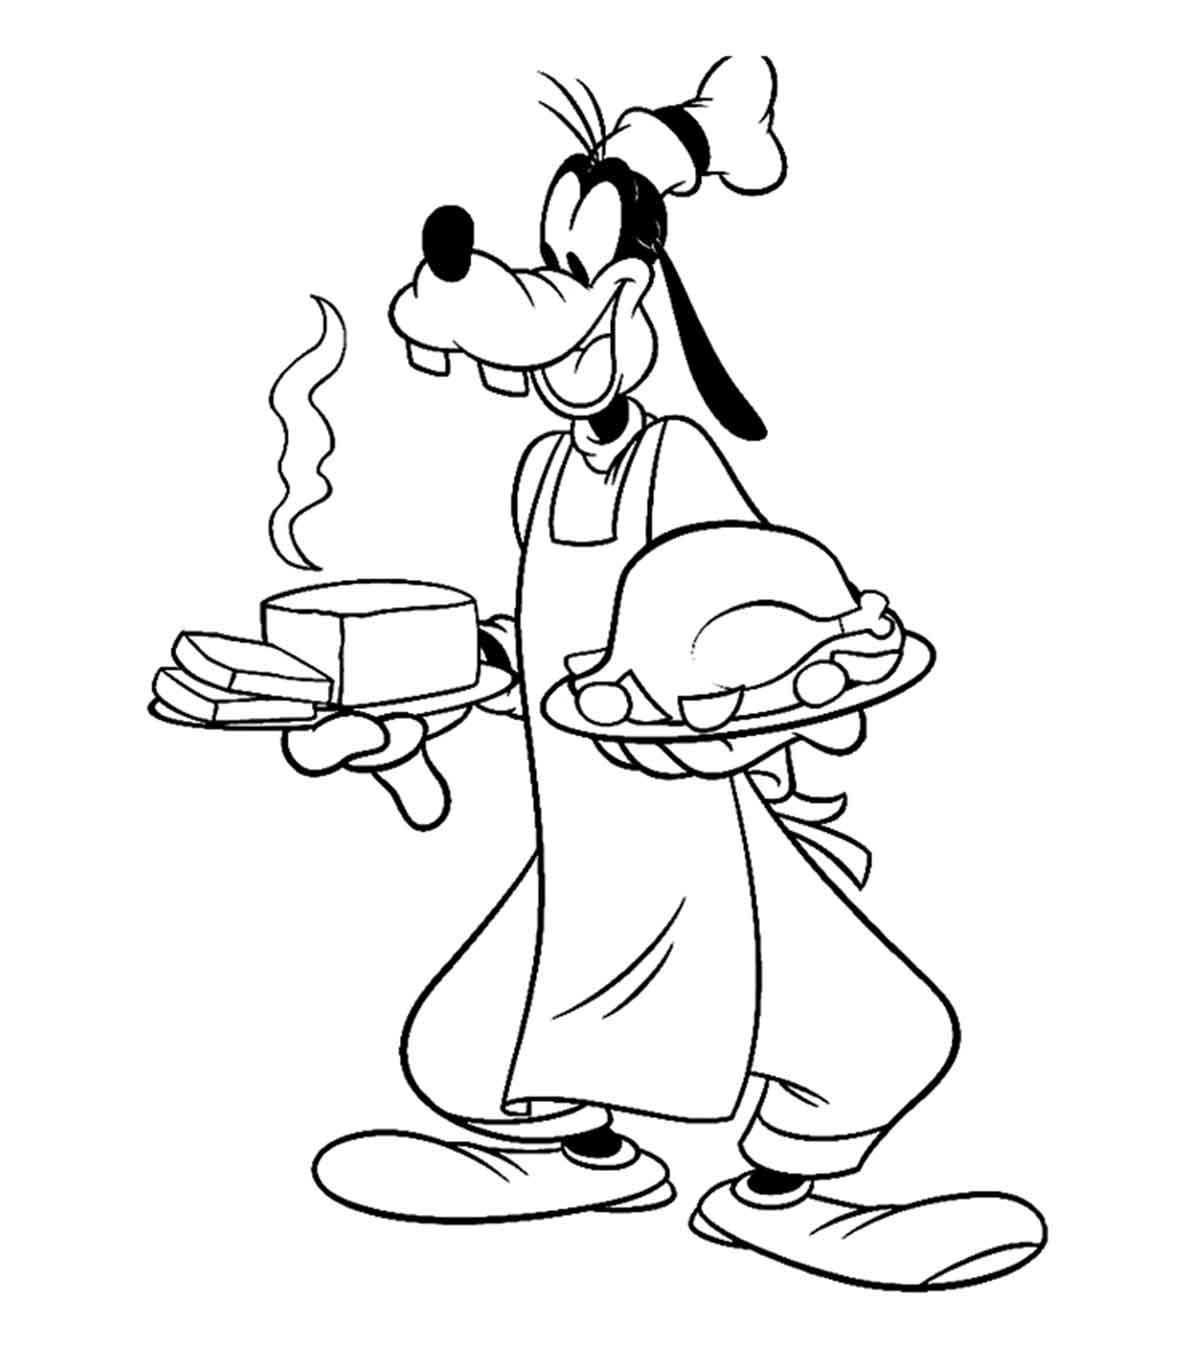 Goofy Serving Thanksgiving Dinner Coloring